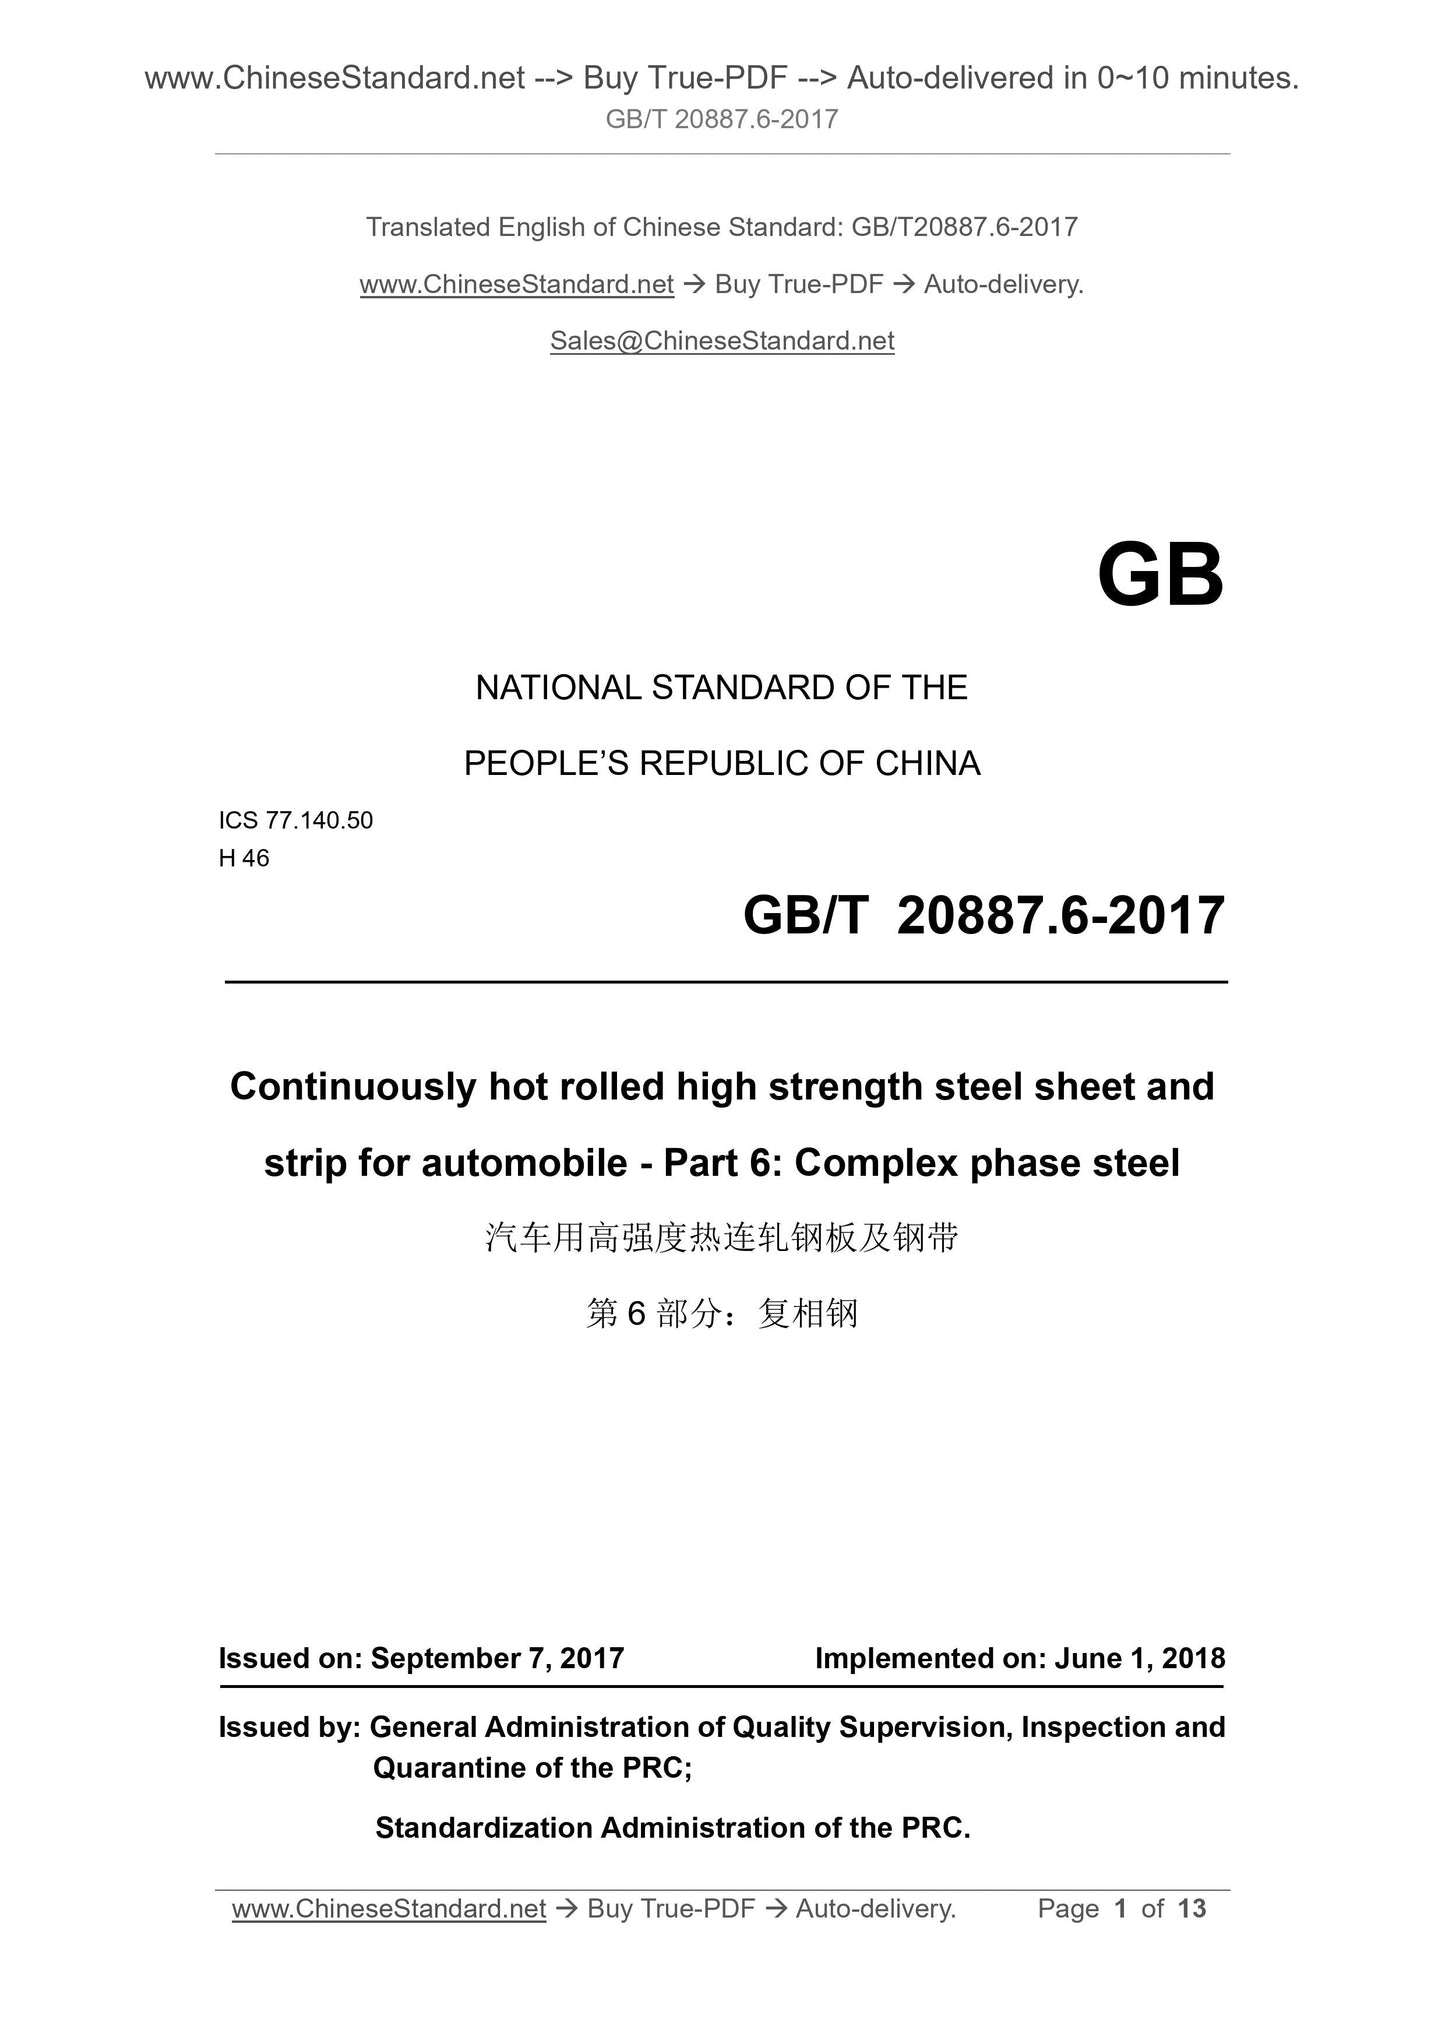 GB/T 20887.6-2017 Page 1